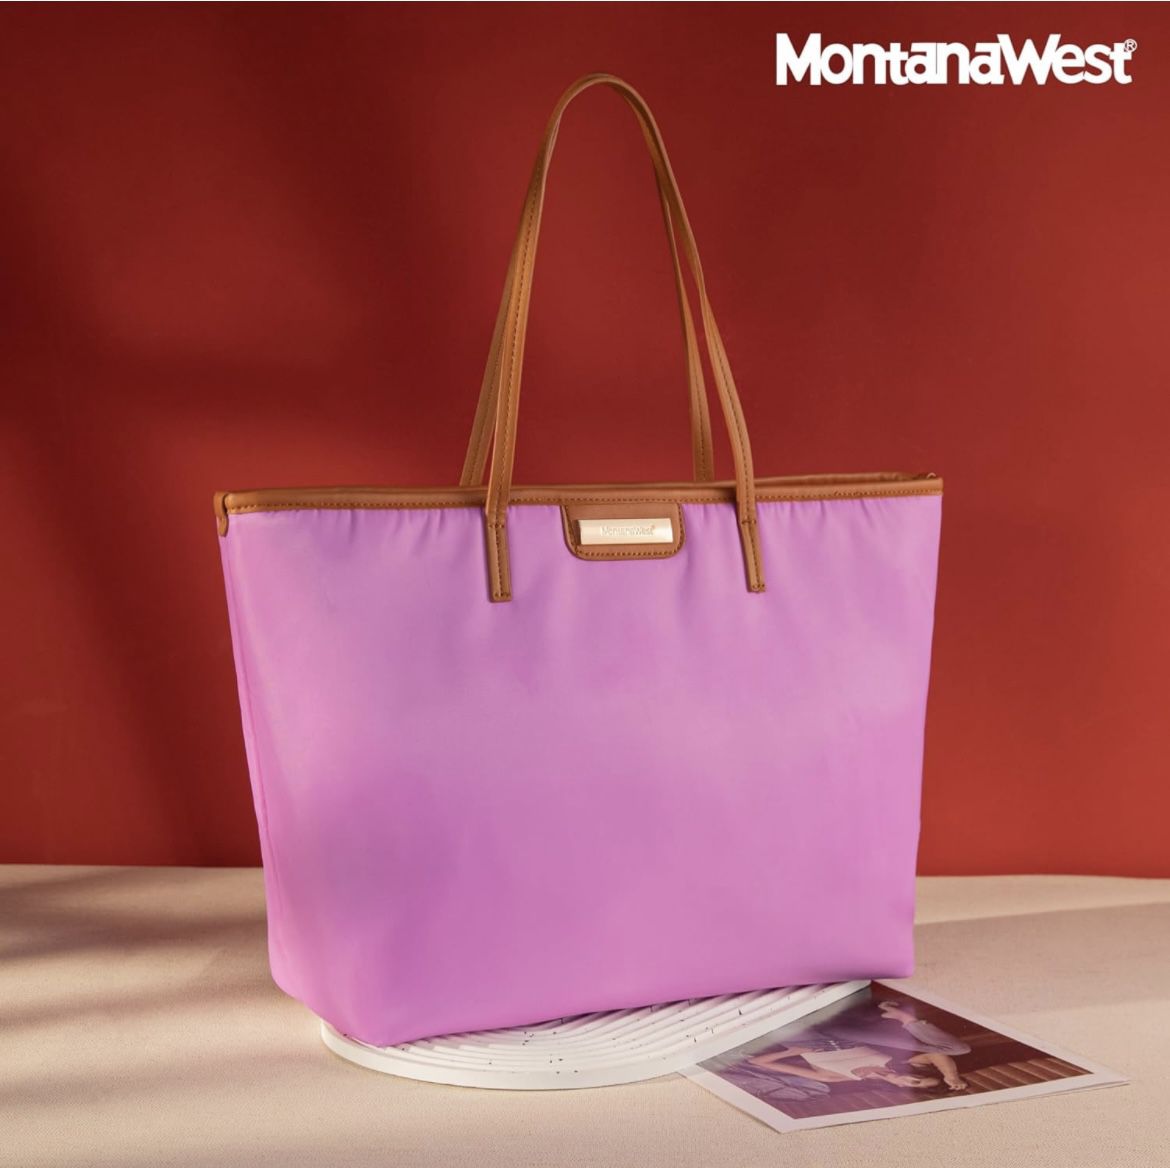 Purple Montana West Structured Tote Bag